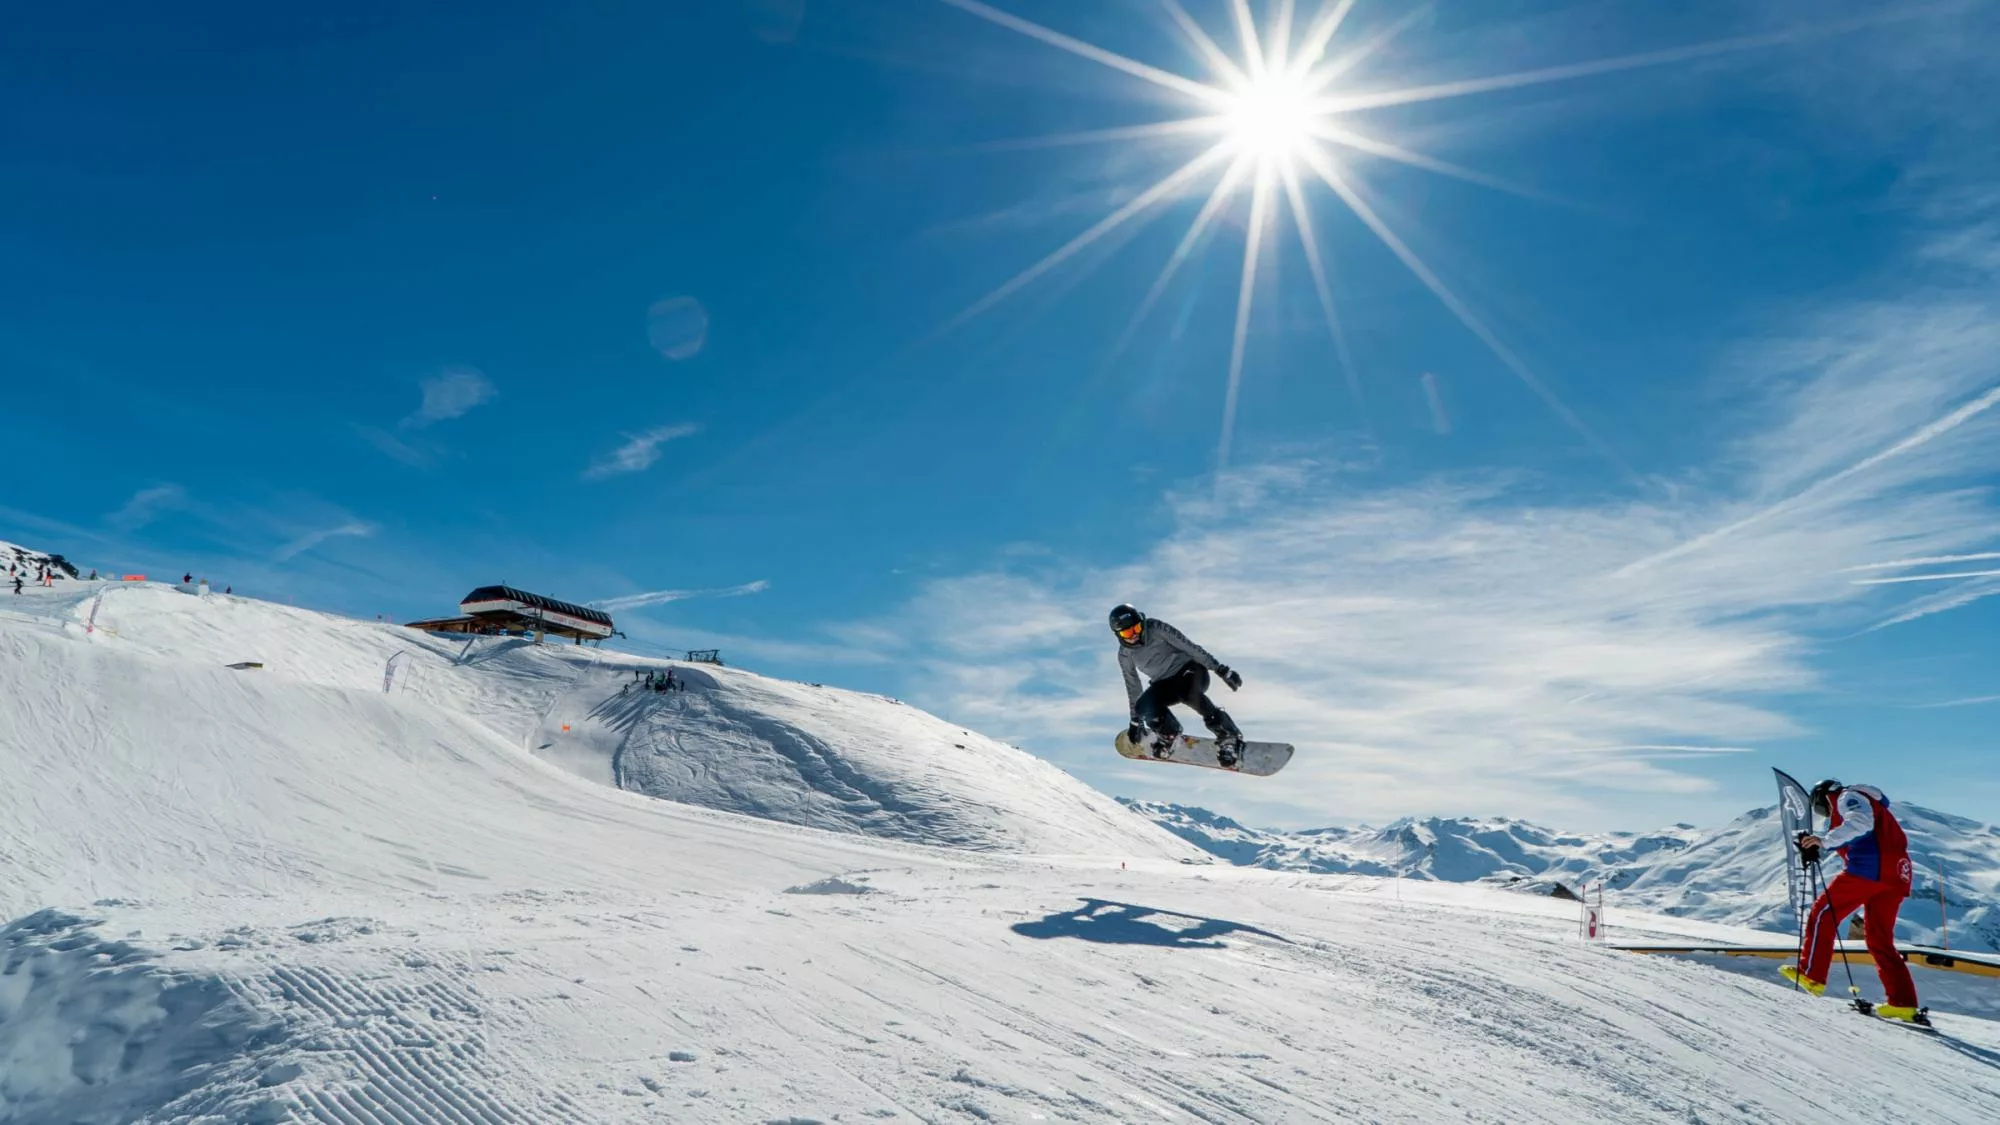 Find out what’s new in the 3 Valleys in winter 2018/2019